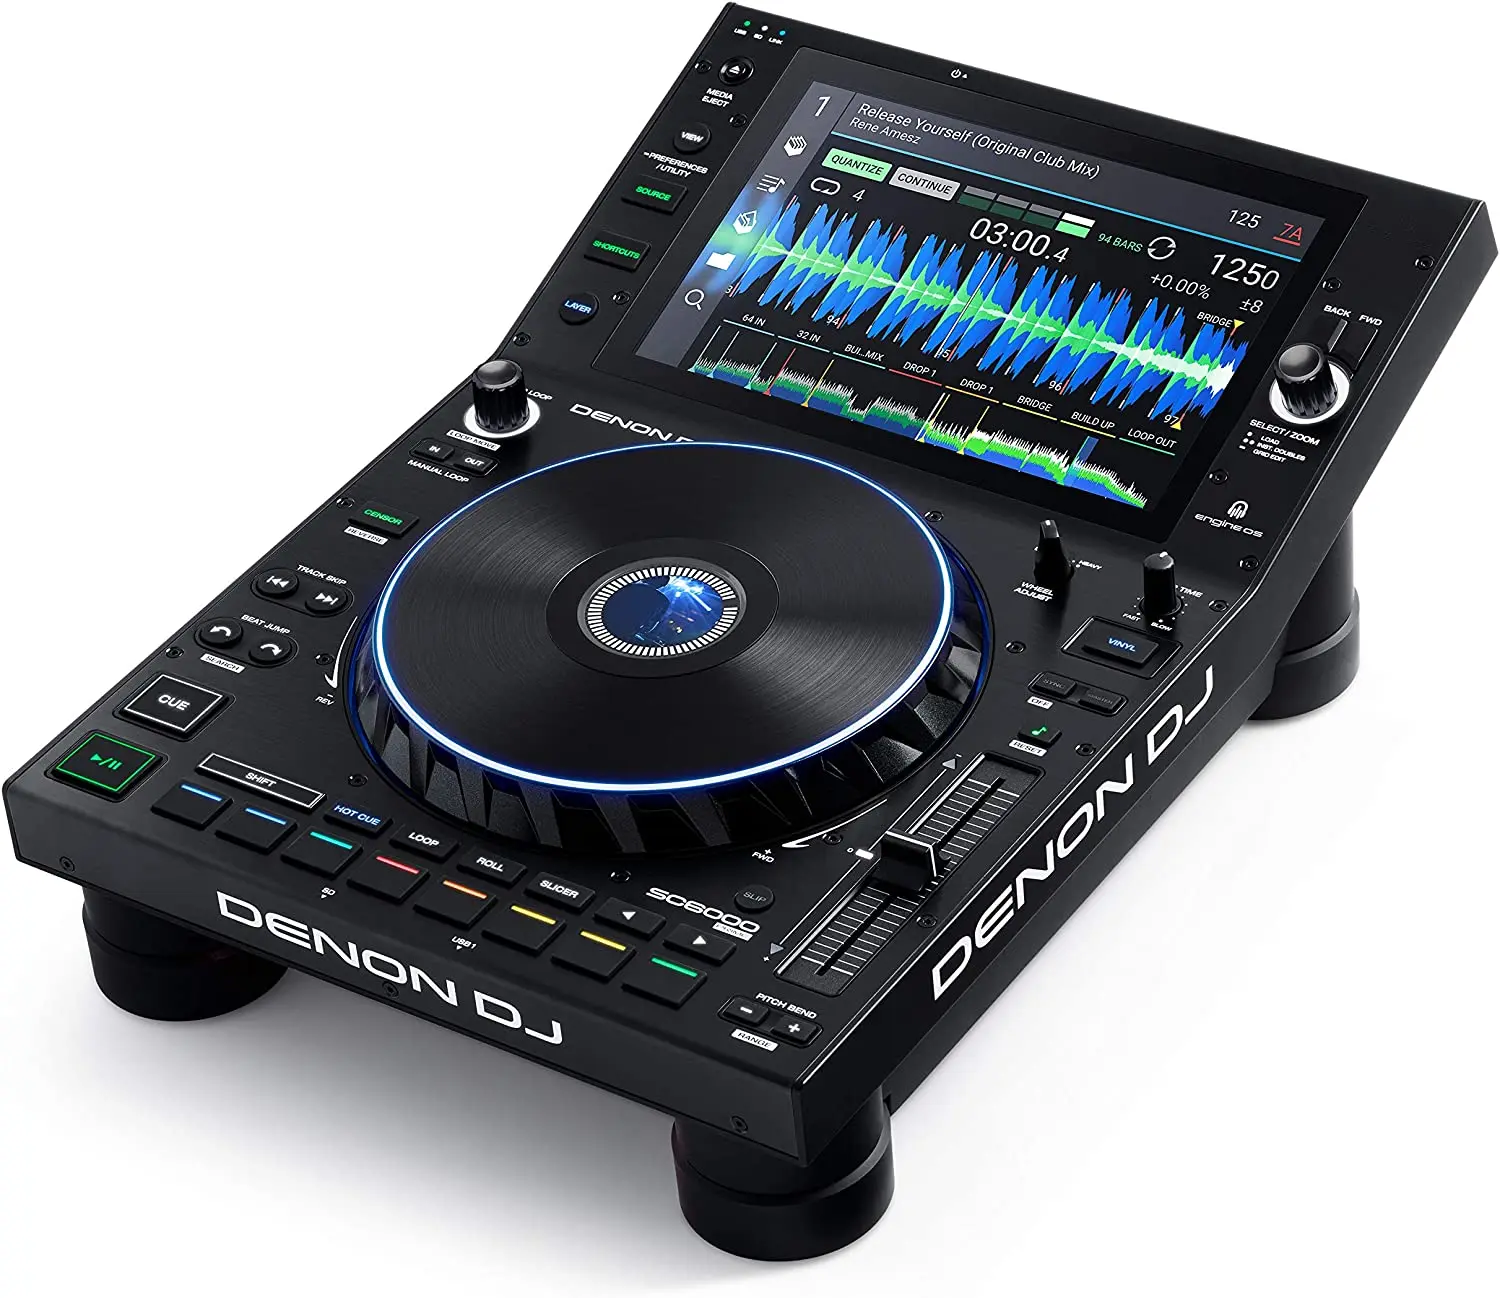 

BRAND NEW Denon DJ SC6000 PRIME – Professional Standalone DJ Media Player with WiFi Music Streaming and 10.1-Inch Touchscreen